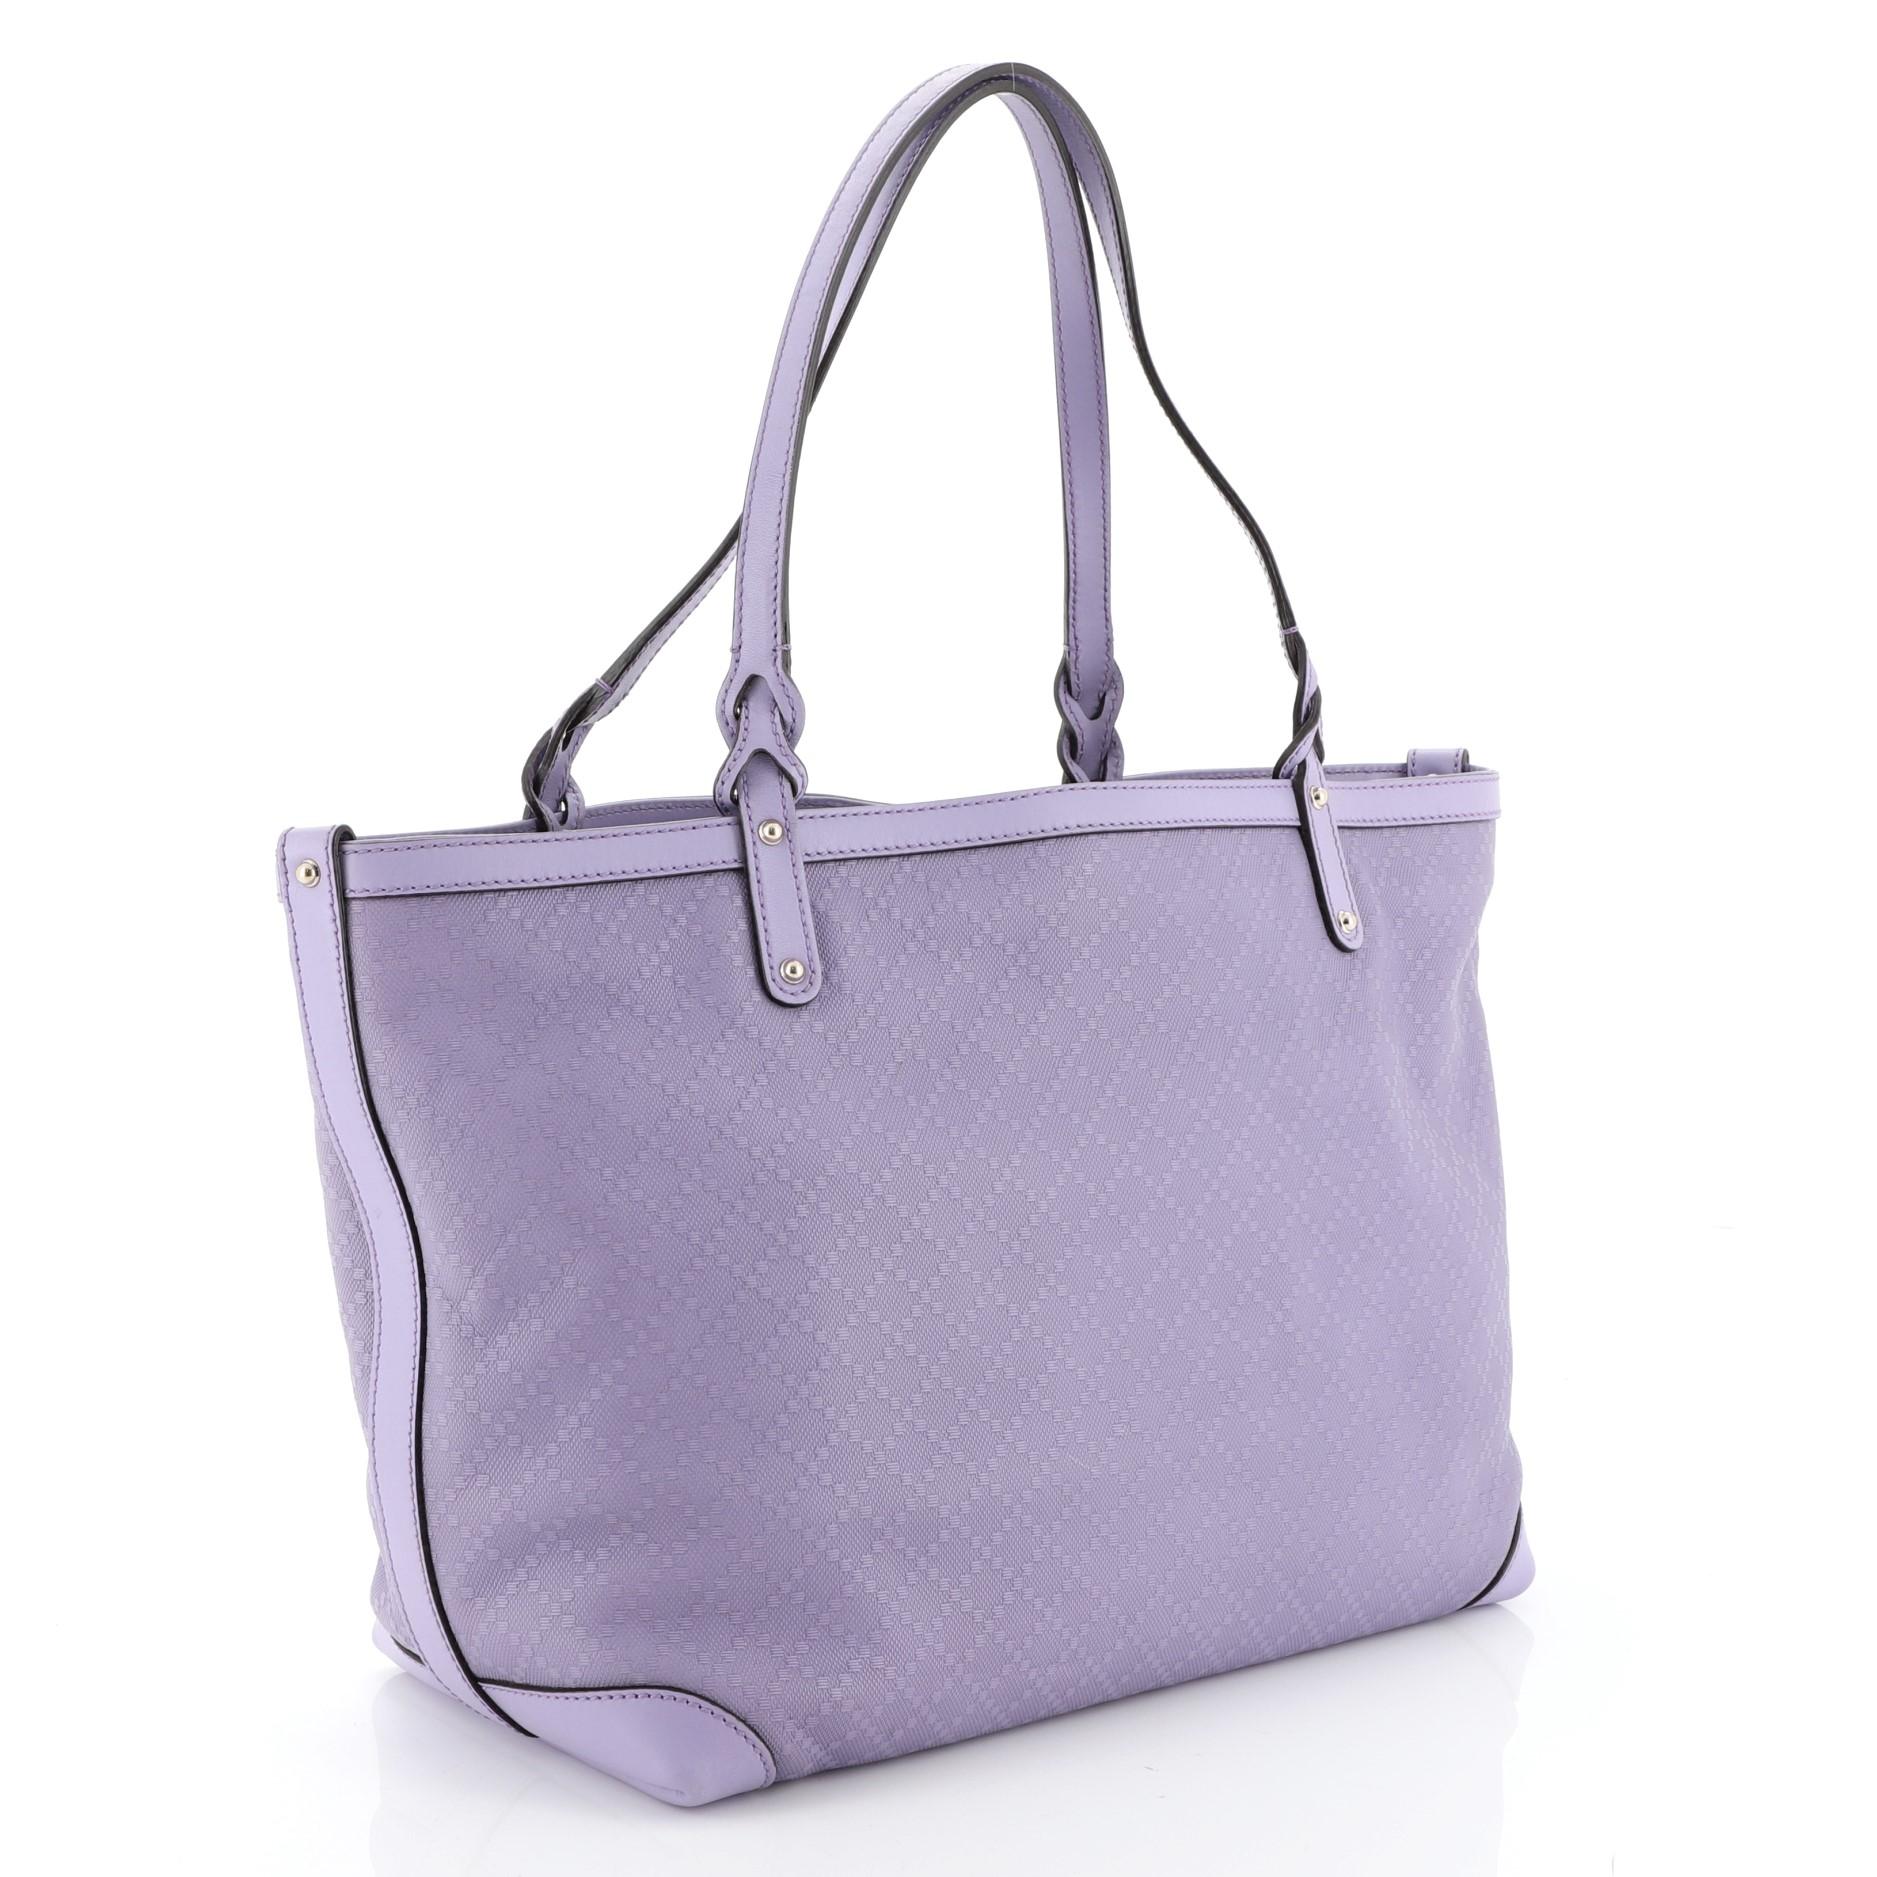 This Gucci Craft Tote Diamante Leather Medium, crafted from purple diamante pattern leather, features dual-flat handles with braided ends, and gold-tone hardware. Its snap hook closure opens to a neutral fabric interior with zip and slip pockets.